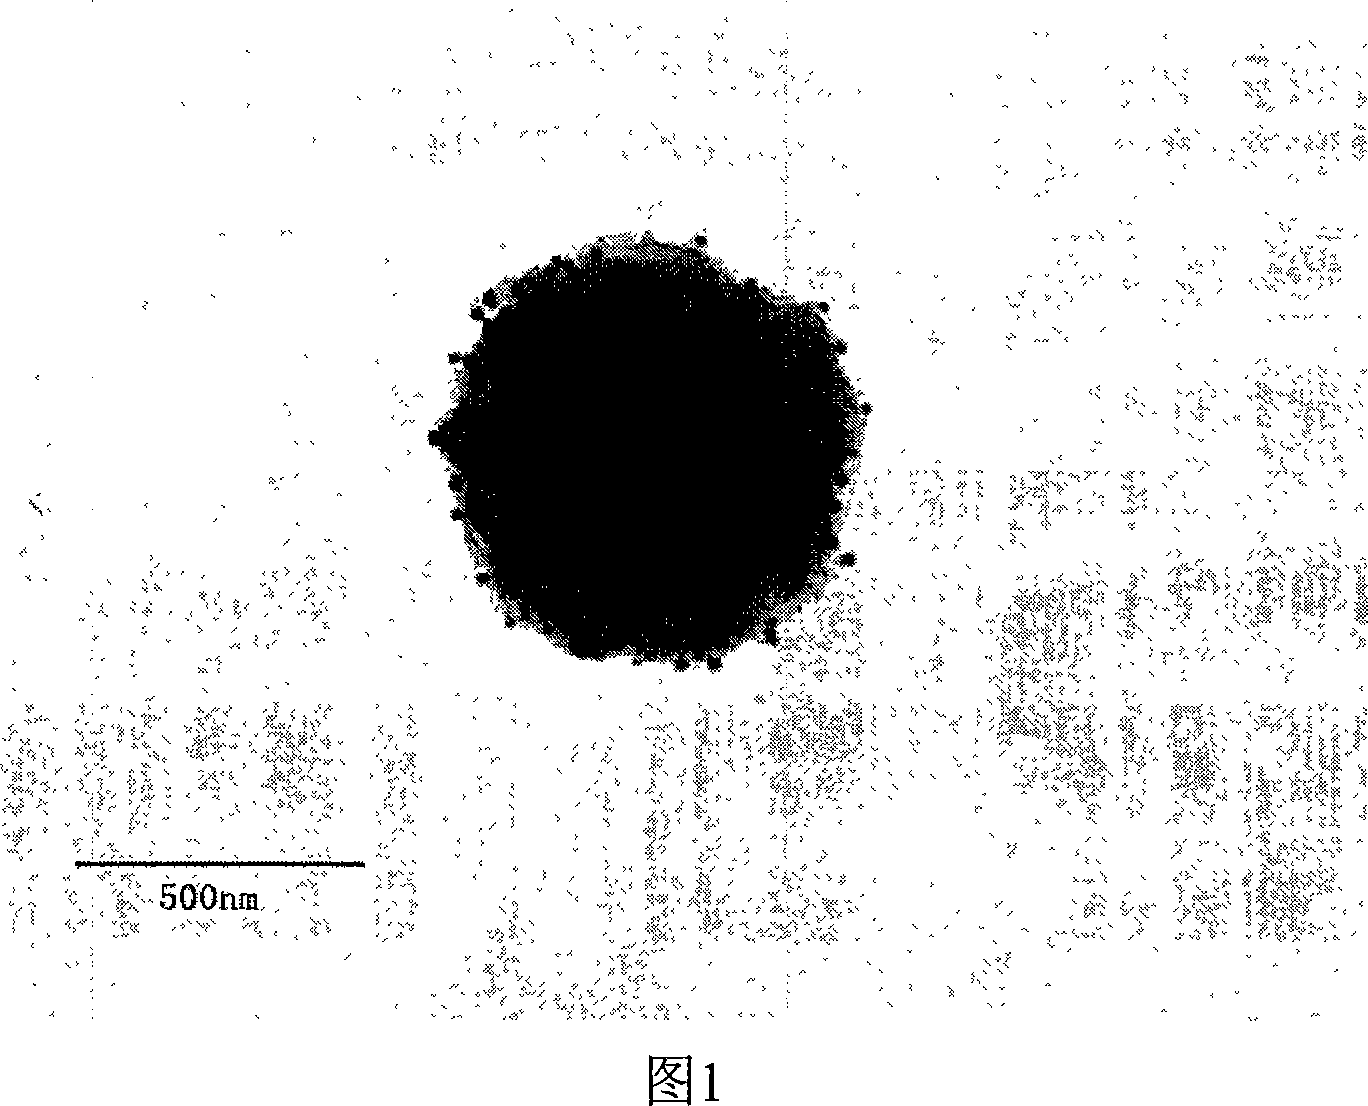 Composite material of Nano grains of silver and carriers of polymer microballons, and preparation method